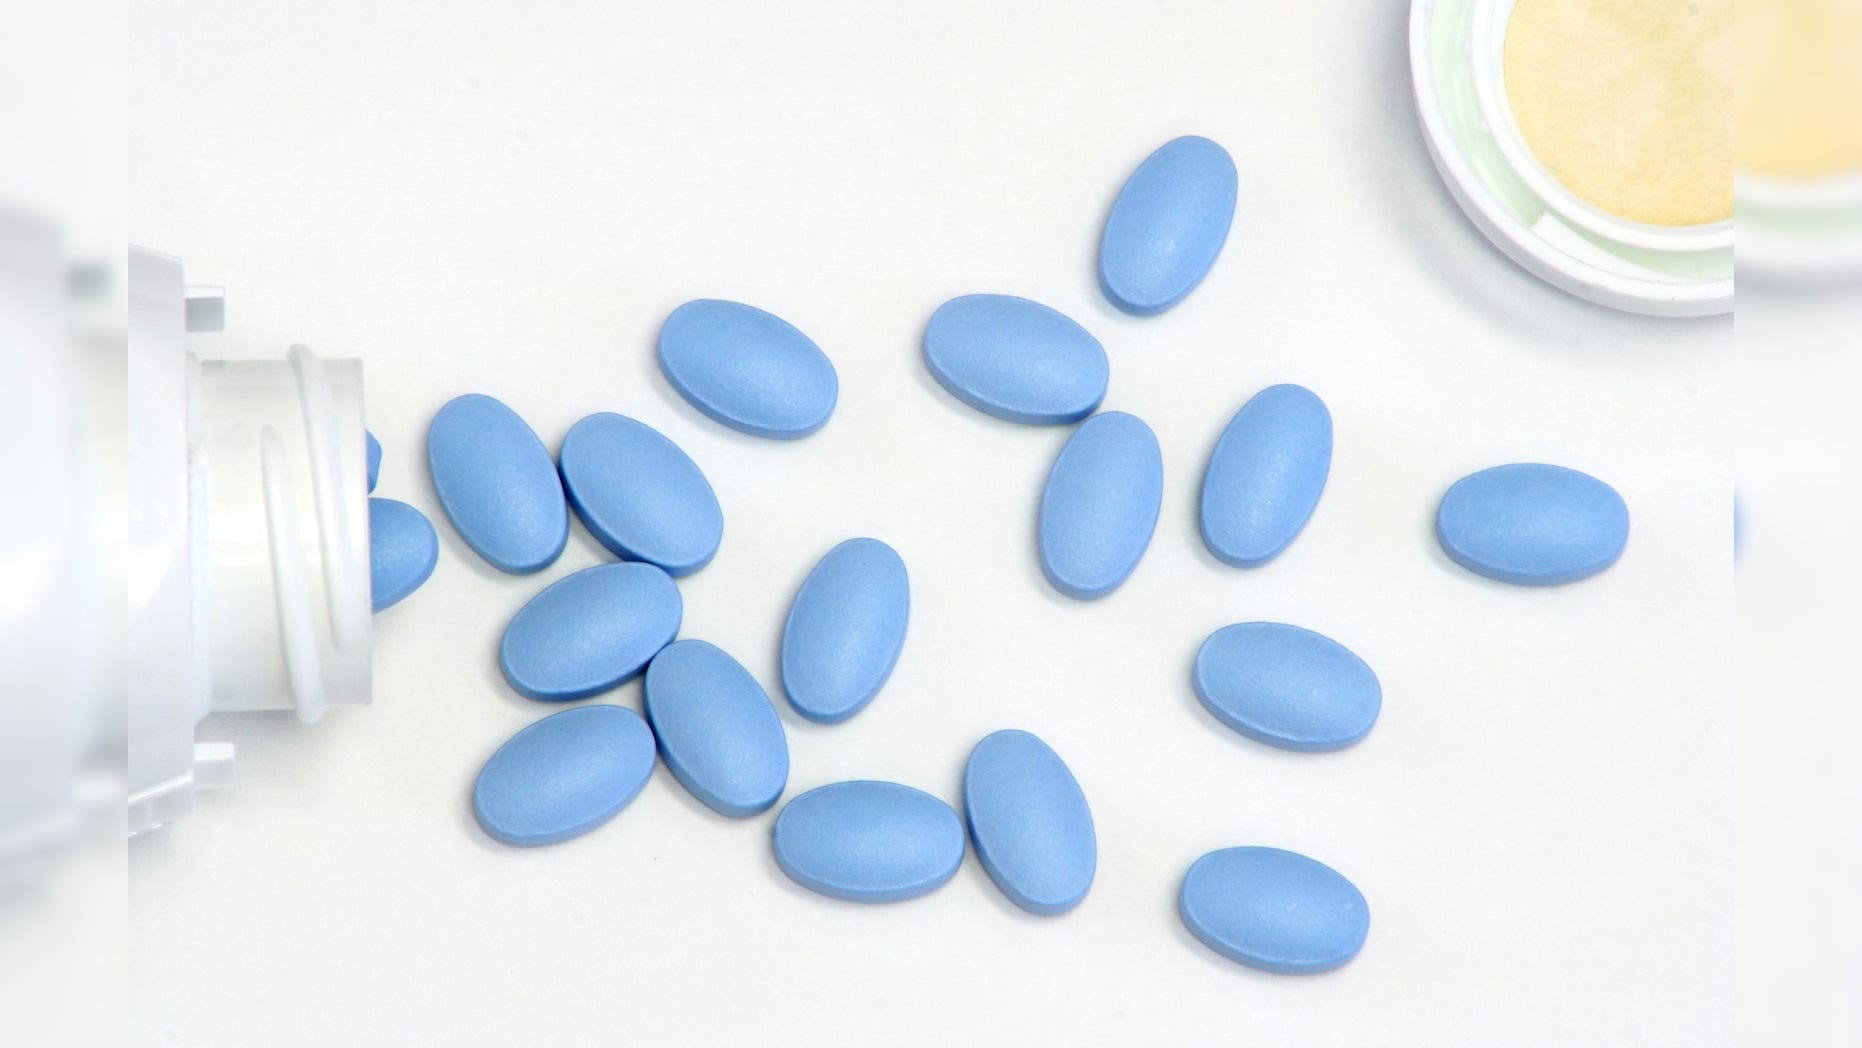 Viagra could help men with coronary artery disease live longer, study suggests